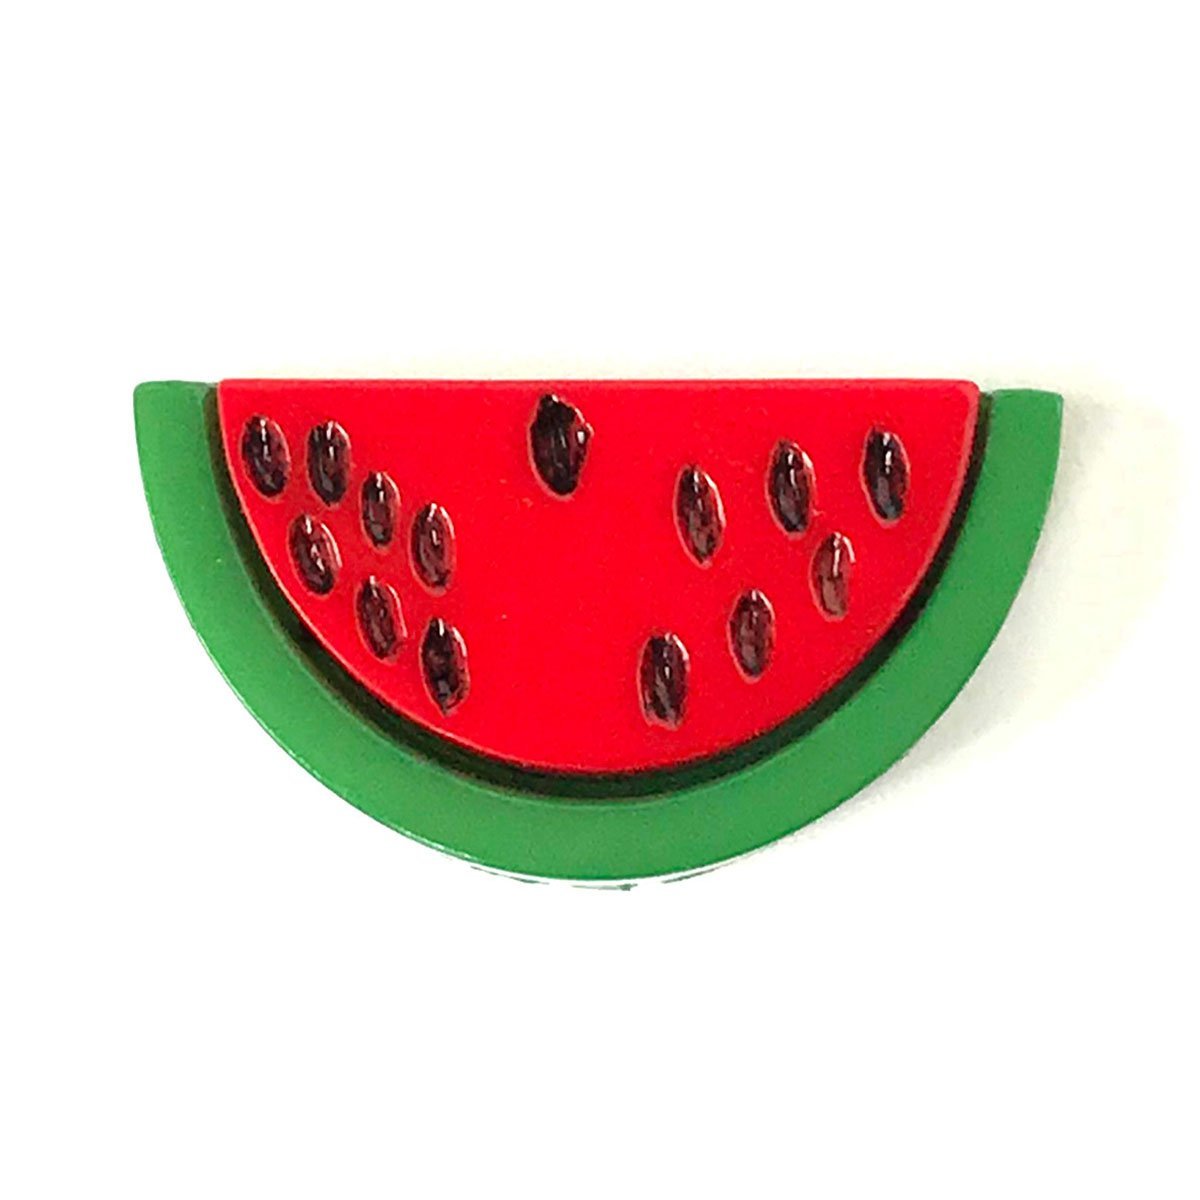 Watermelon - B189 - Buttons Galore and More